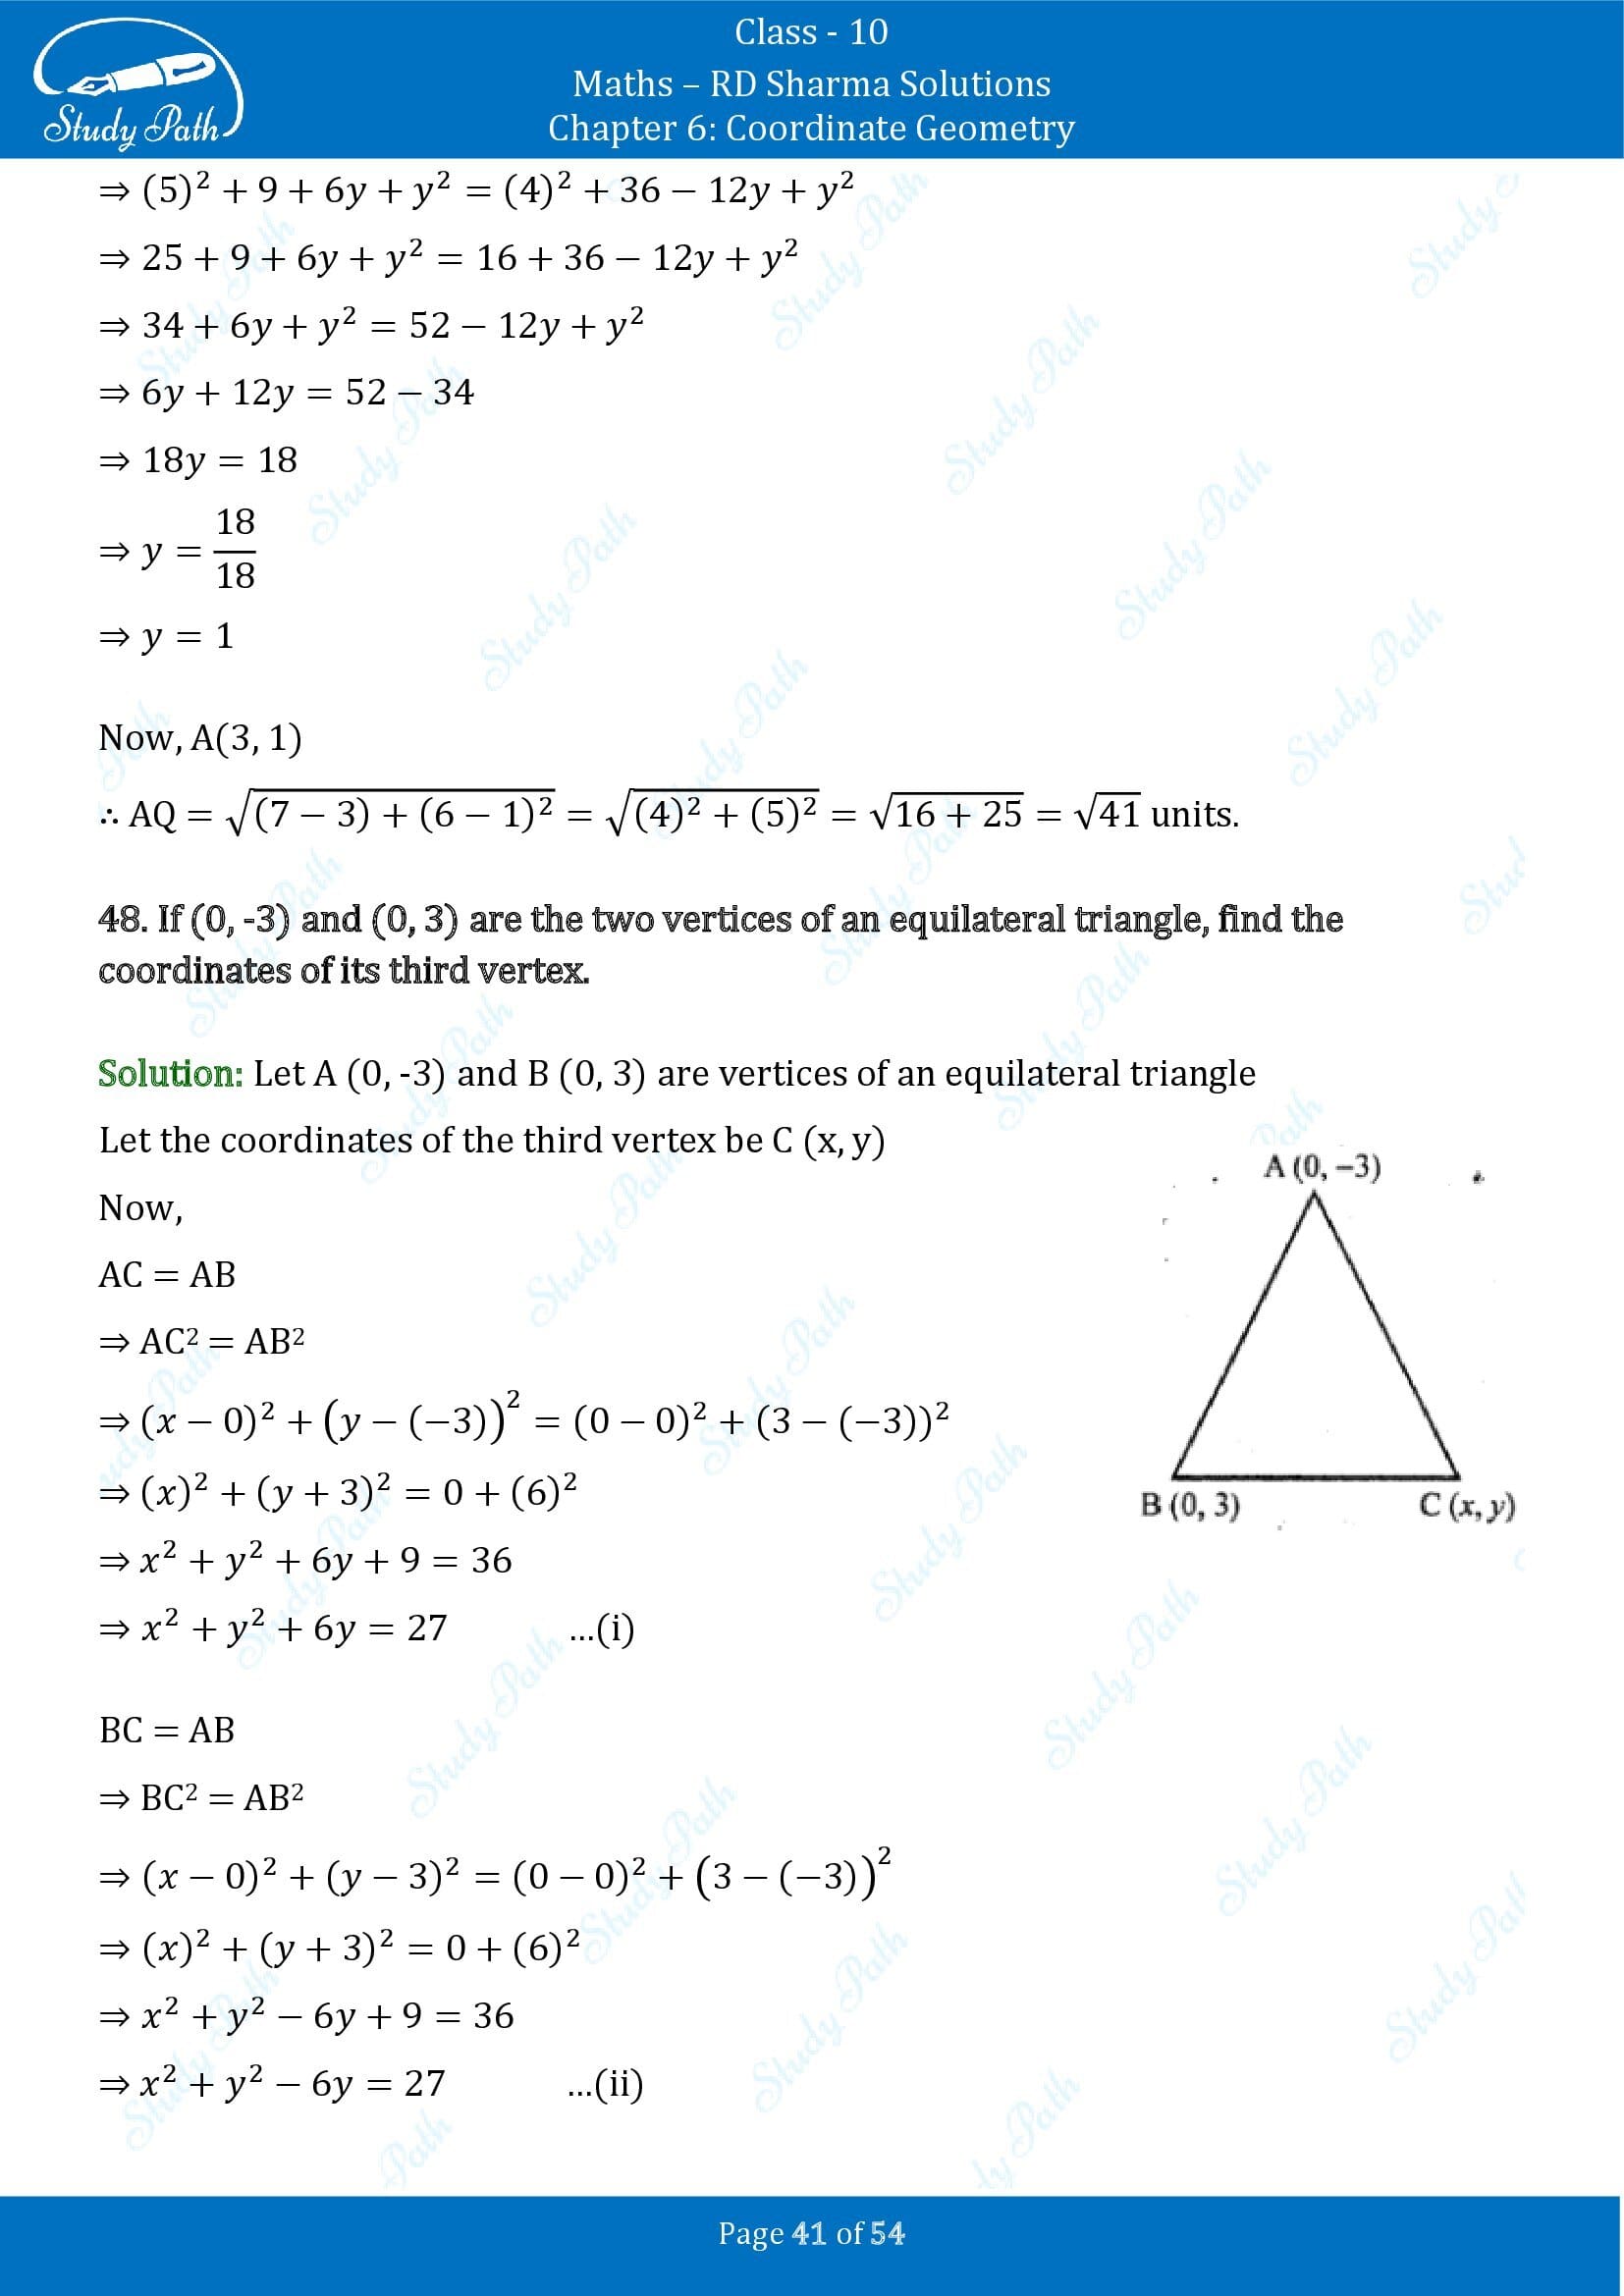 RD Sharma Solutions Class 10 Chapter 6 Coordinate Geometry Exercise 6.2 0041